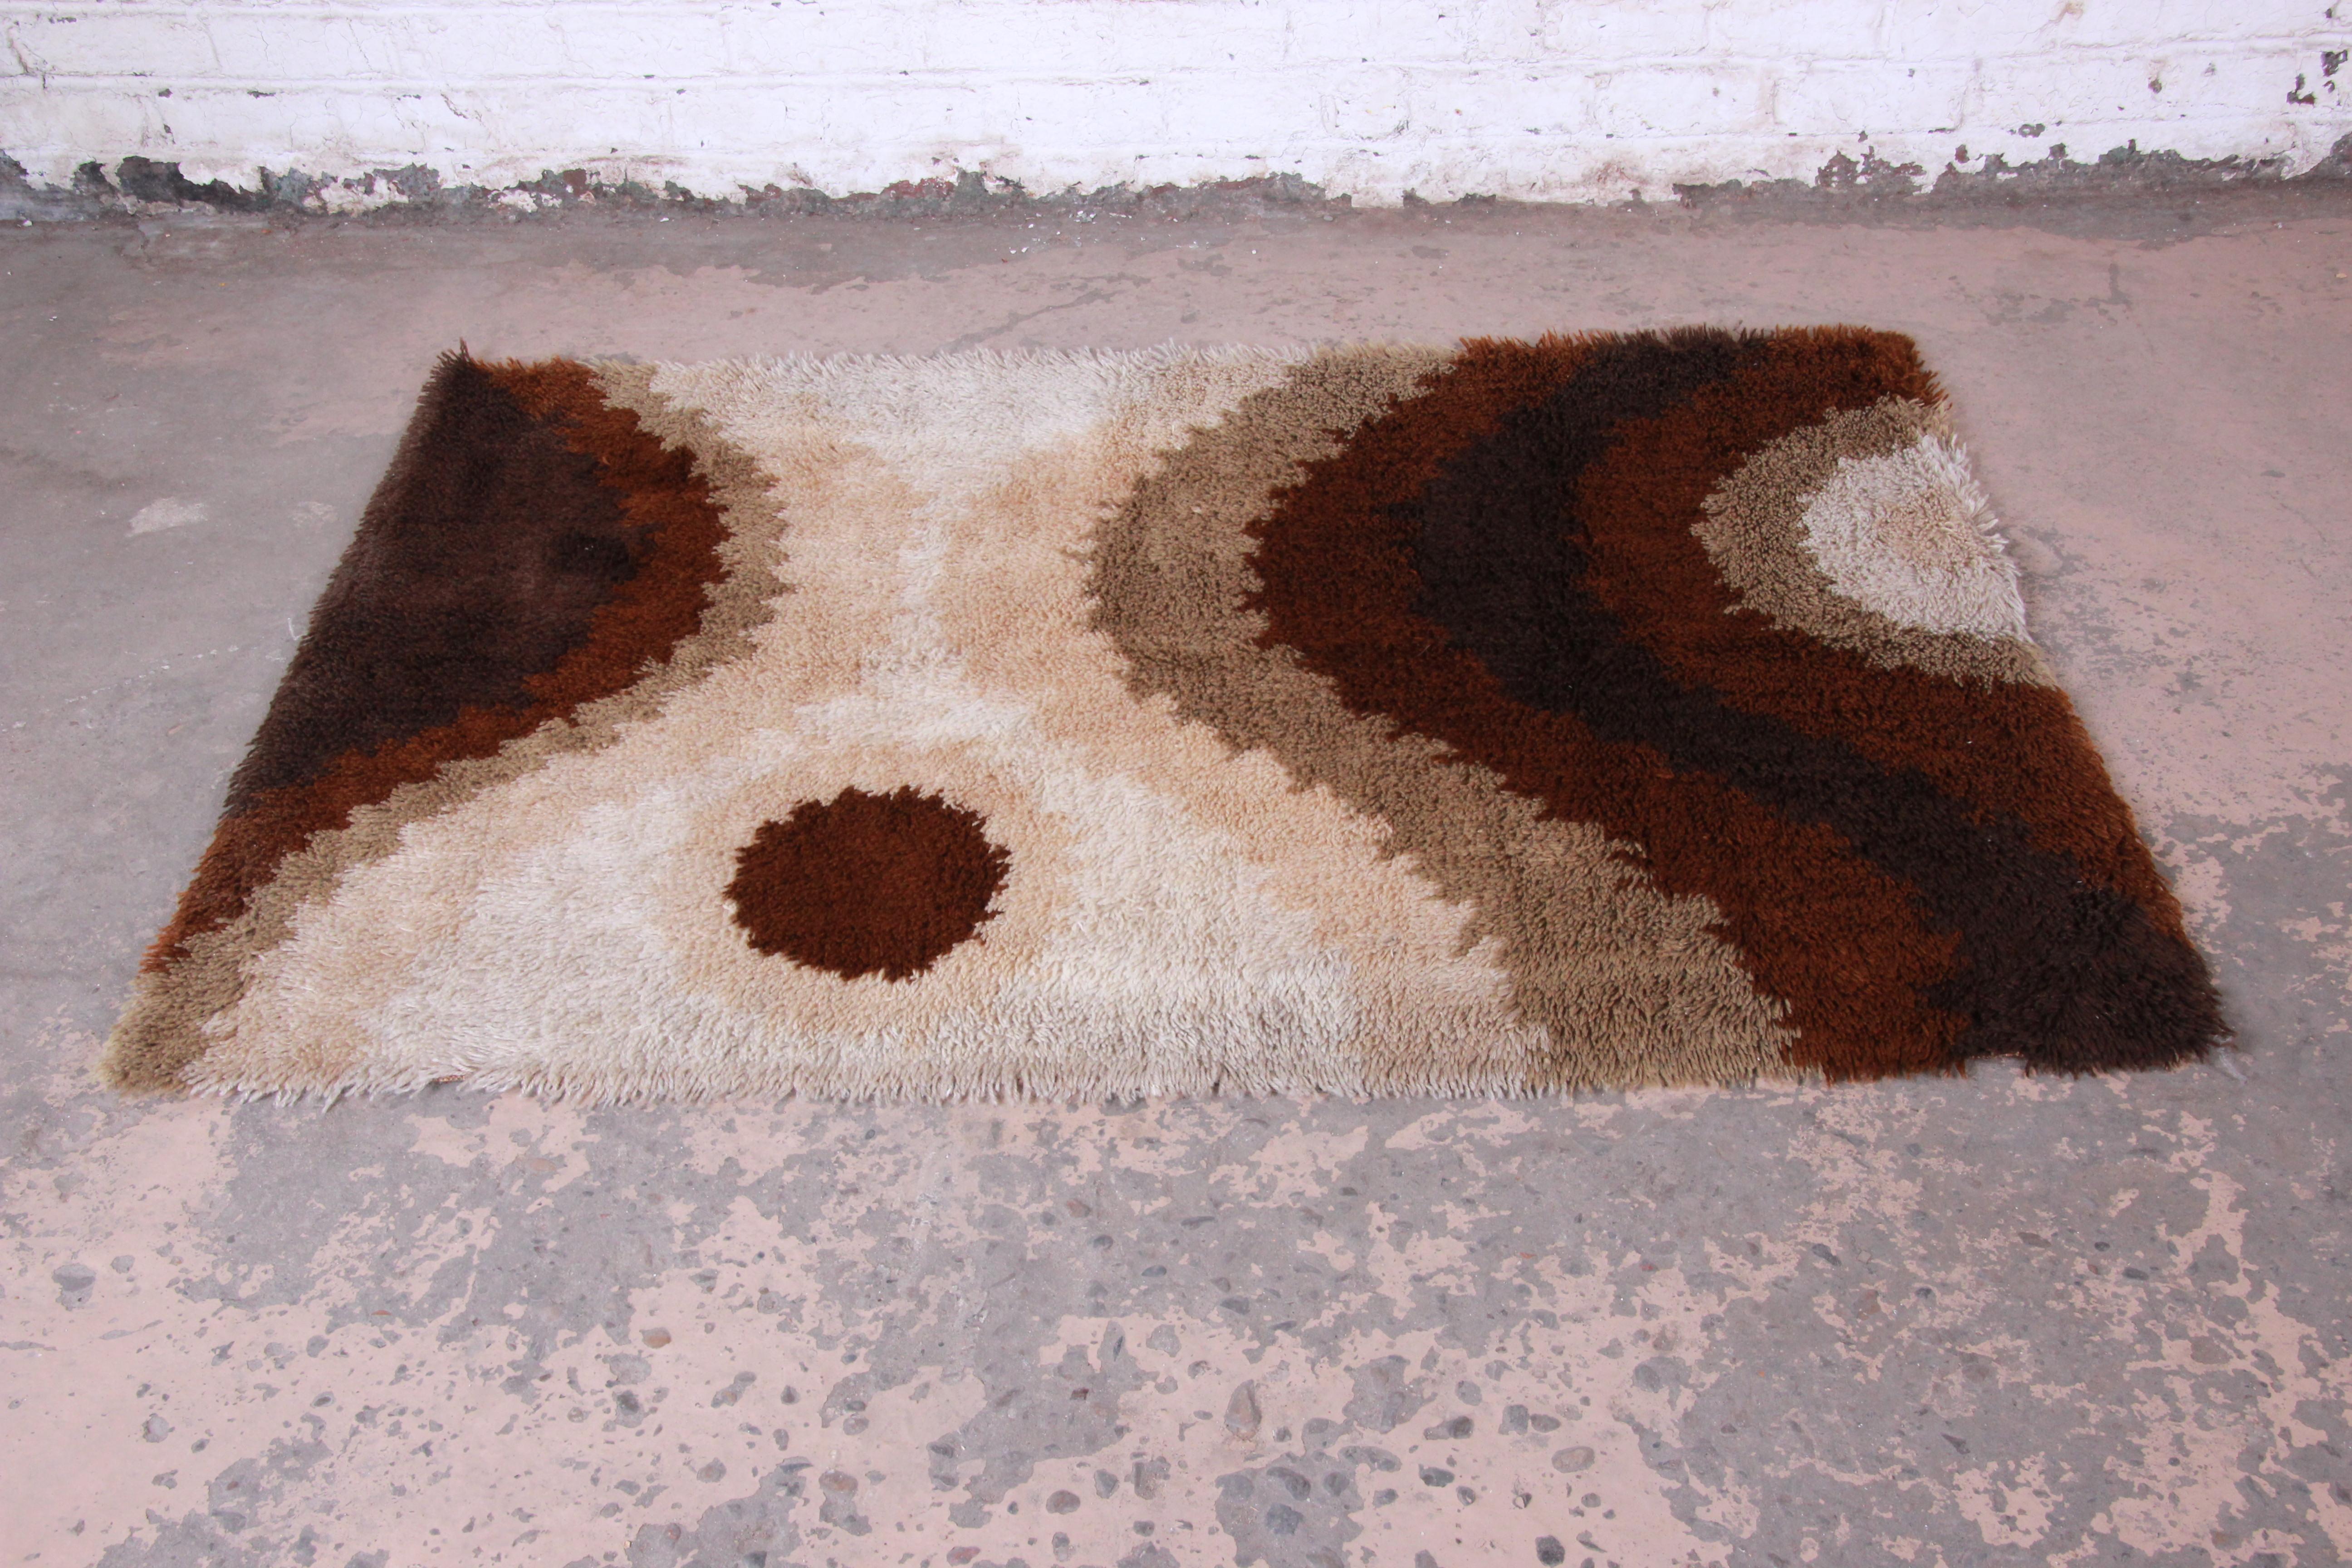 A gorgeous midcentury Danish modern rya shag rug. The rug has a unique abstract design, with earth tone colors in various shades of brown, tan, and ivory. It has a thick wool pile and is in very good vintage condition.

The rug measures 71